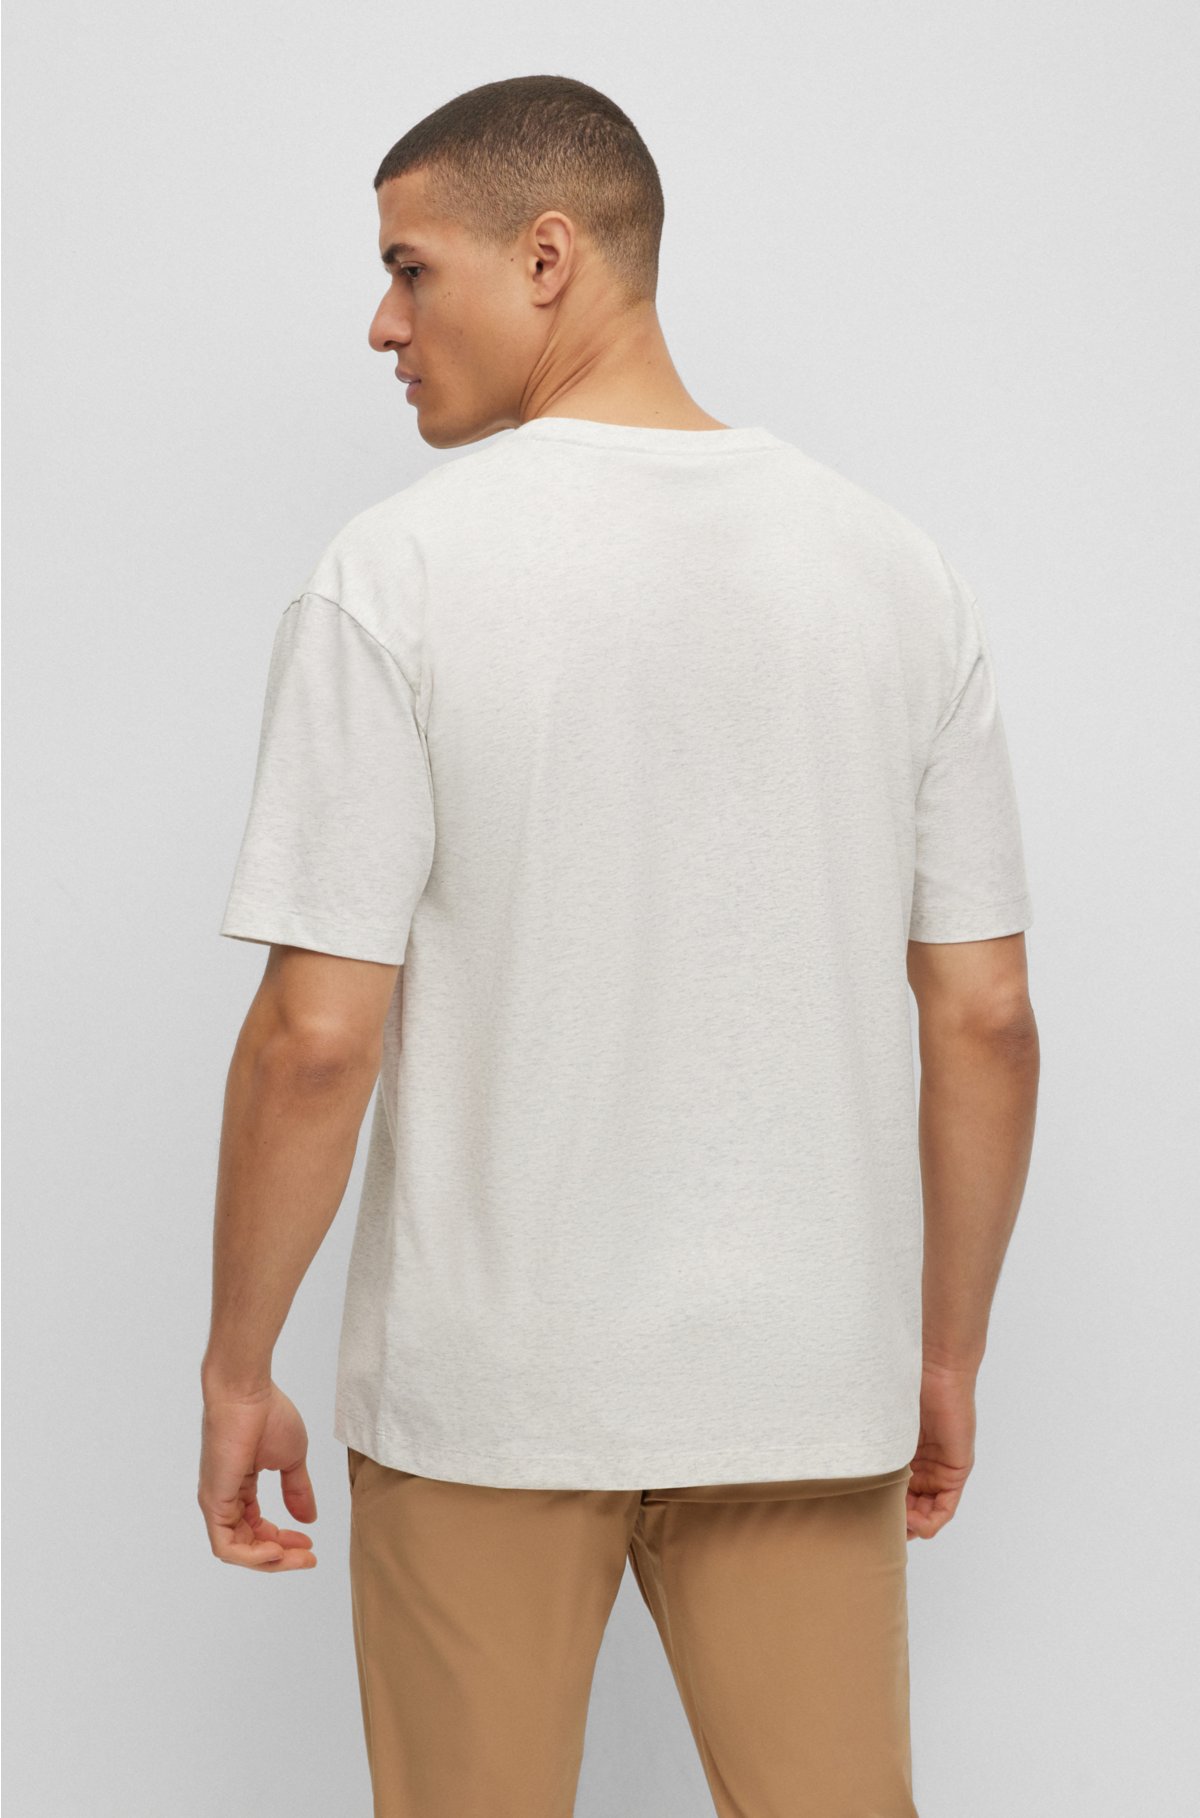 Basic White Cotton Blend Fitted T Shirt